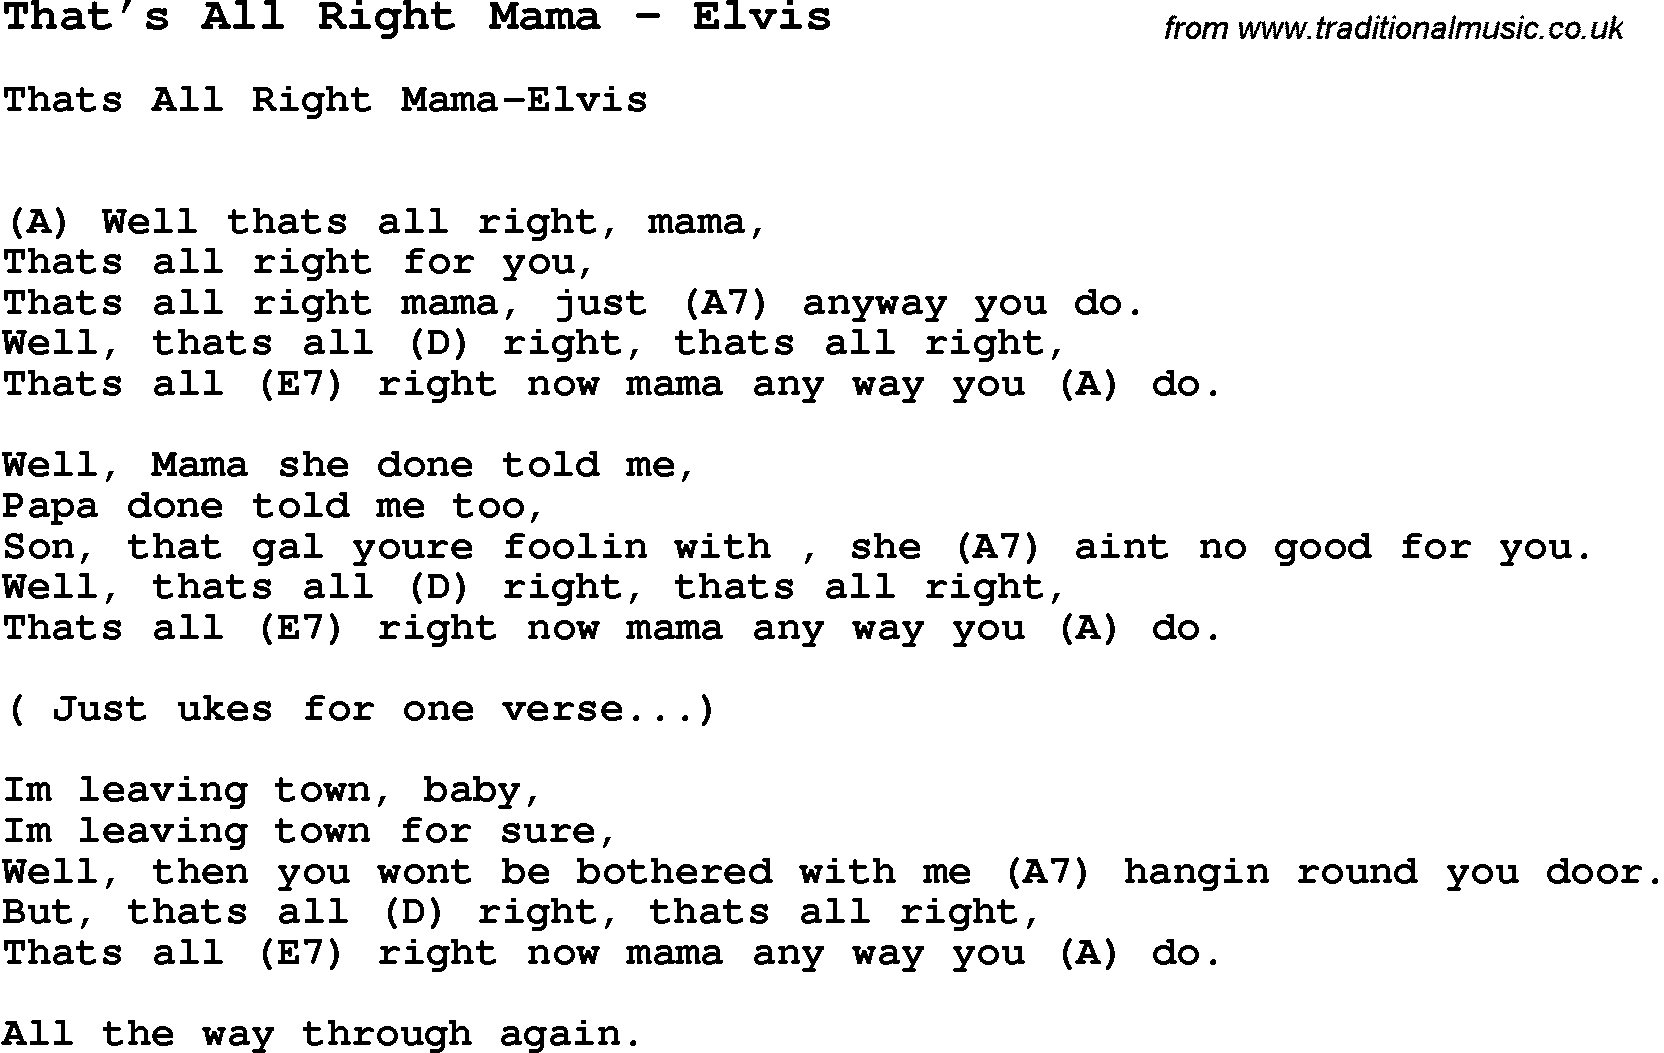 Song That’s All Right Mama by Elvis, with lyrics for vocal performance and accompaniment chords for Ukulele, Guitar Banjo etc.